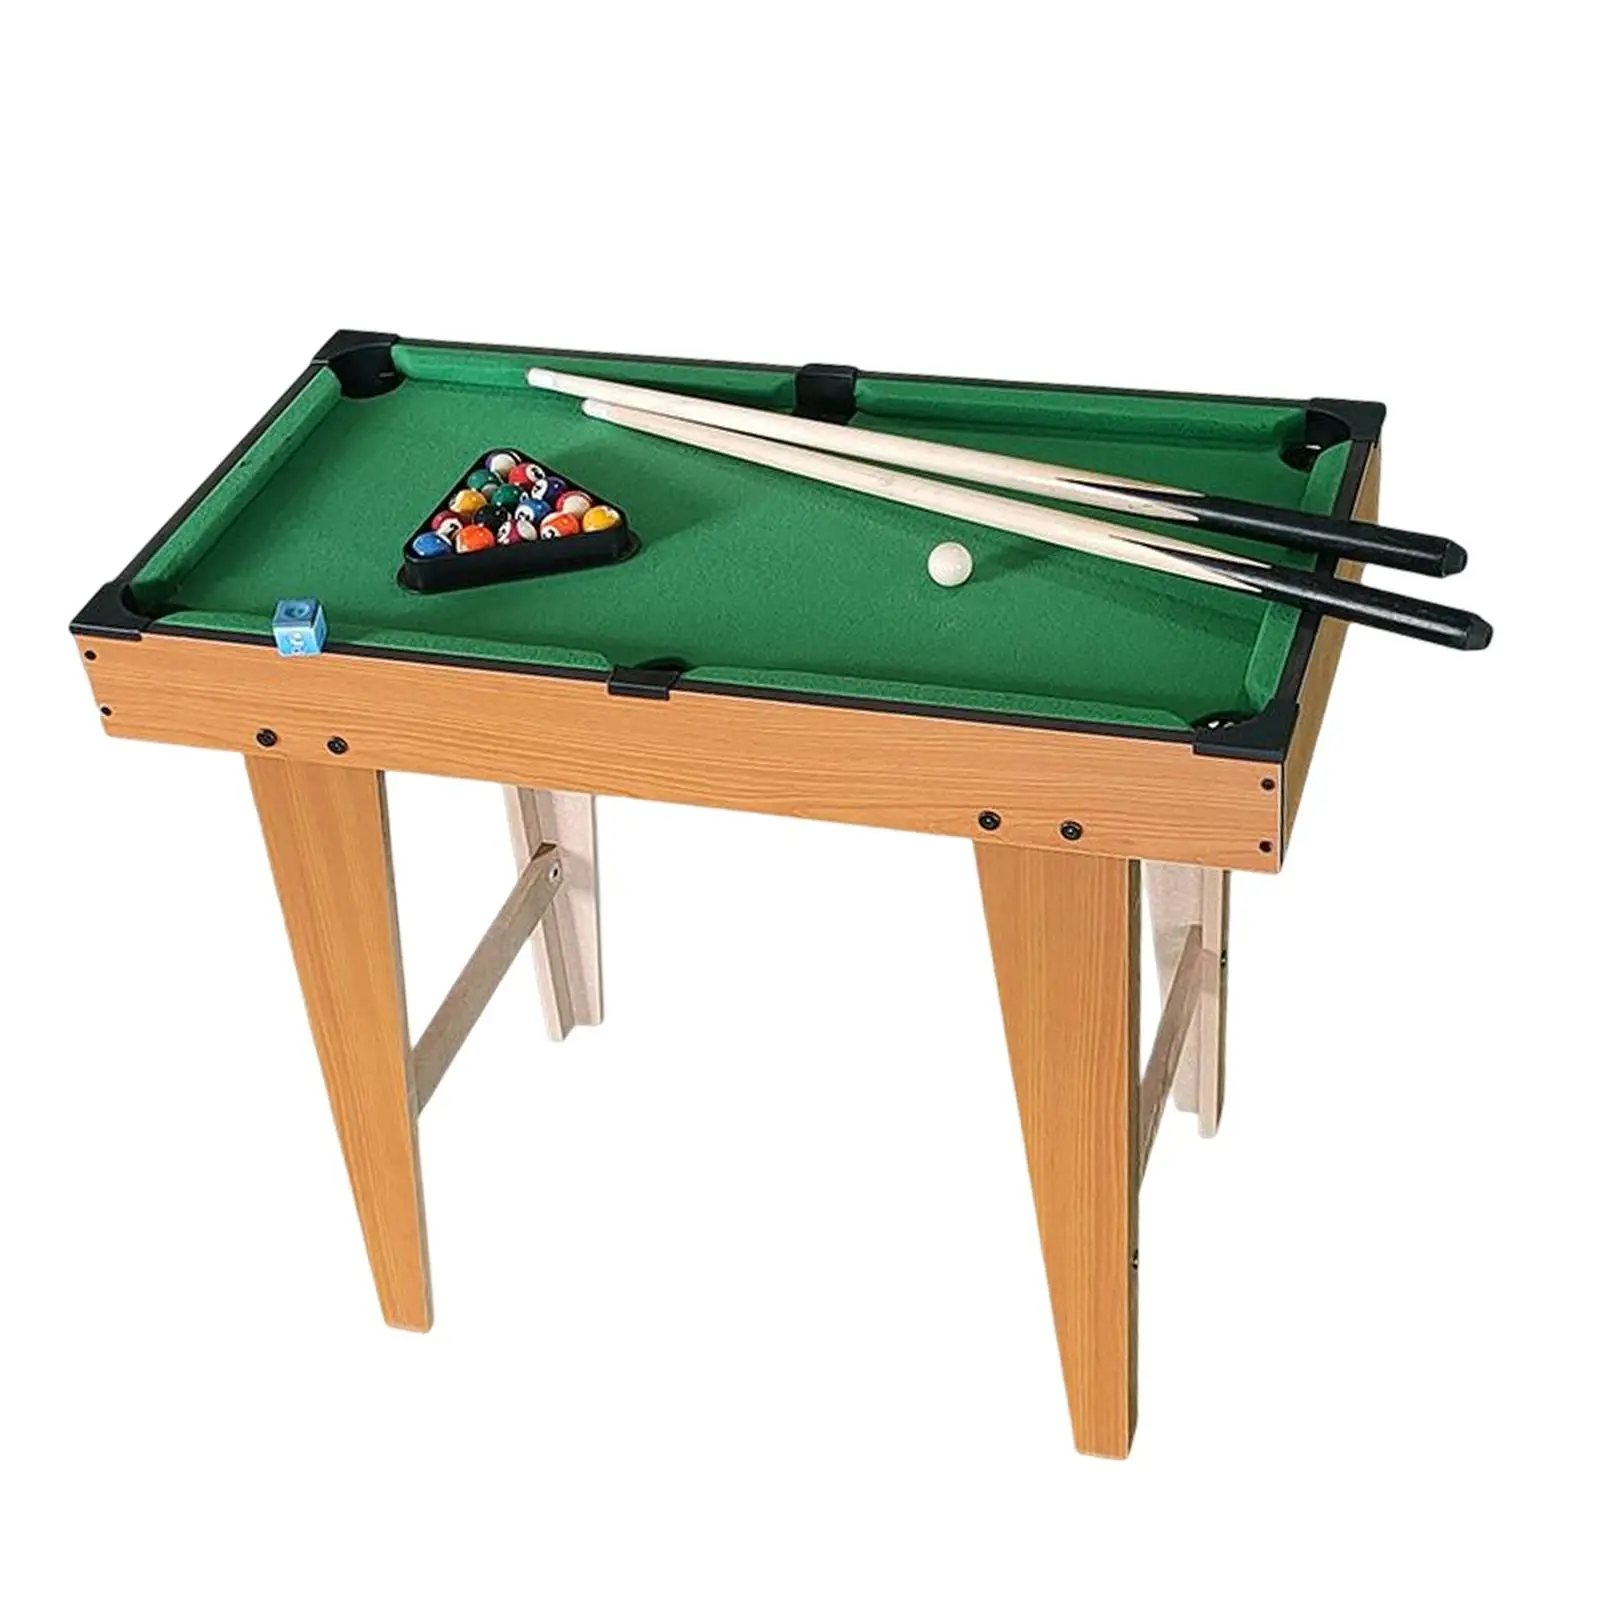 58.5cm Height Pool Table Set Home Office Indoor Game Toy Wooden Leisure 15